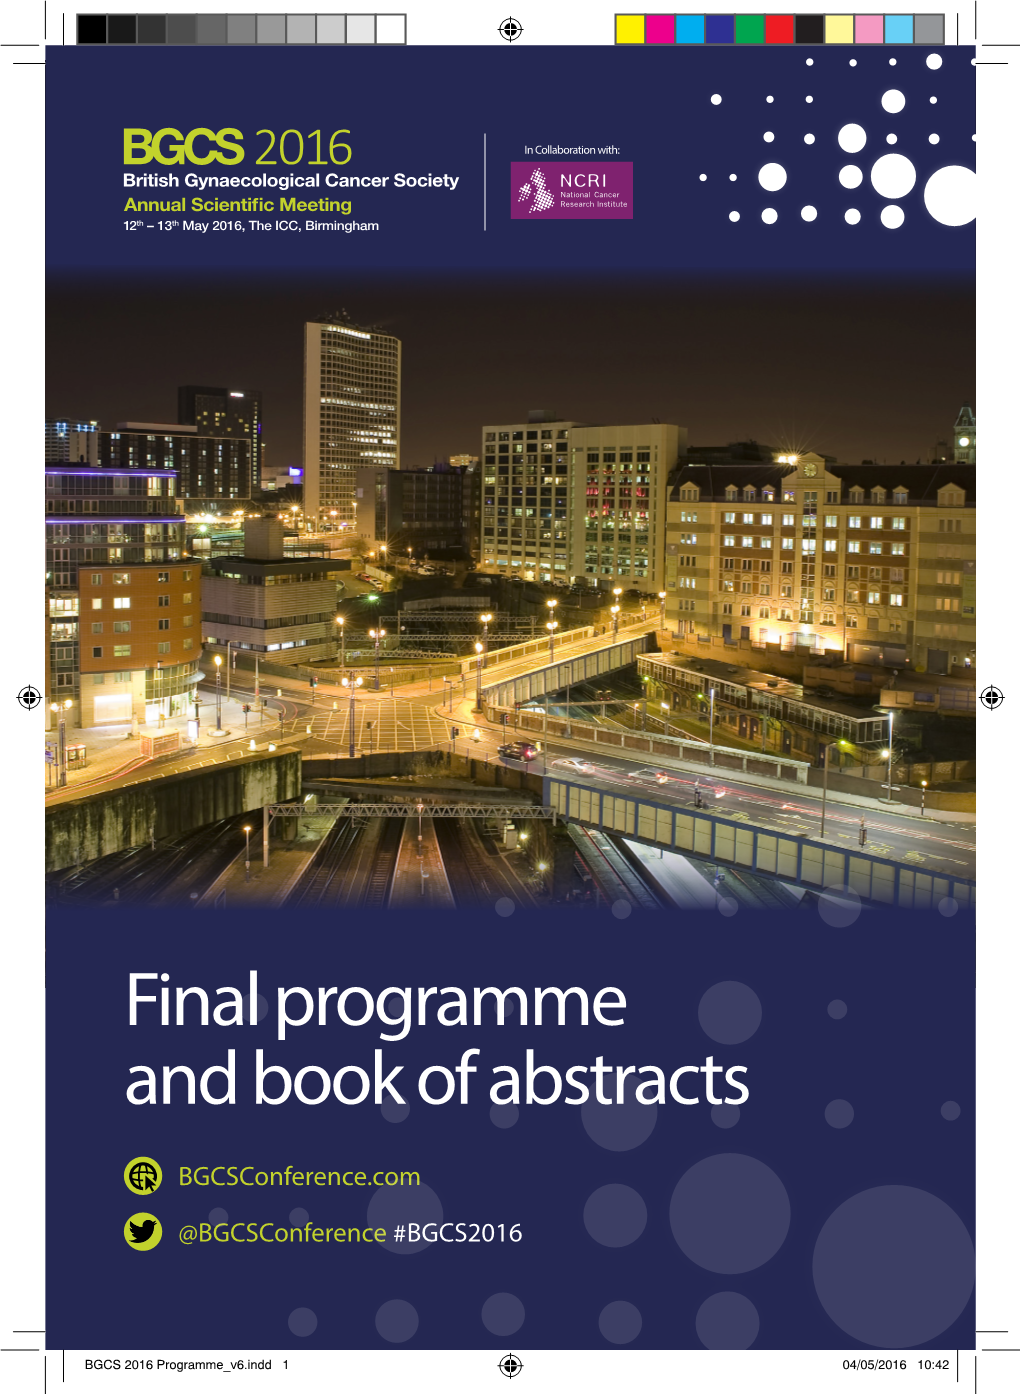 Final Programme and Book of Abstracts